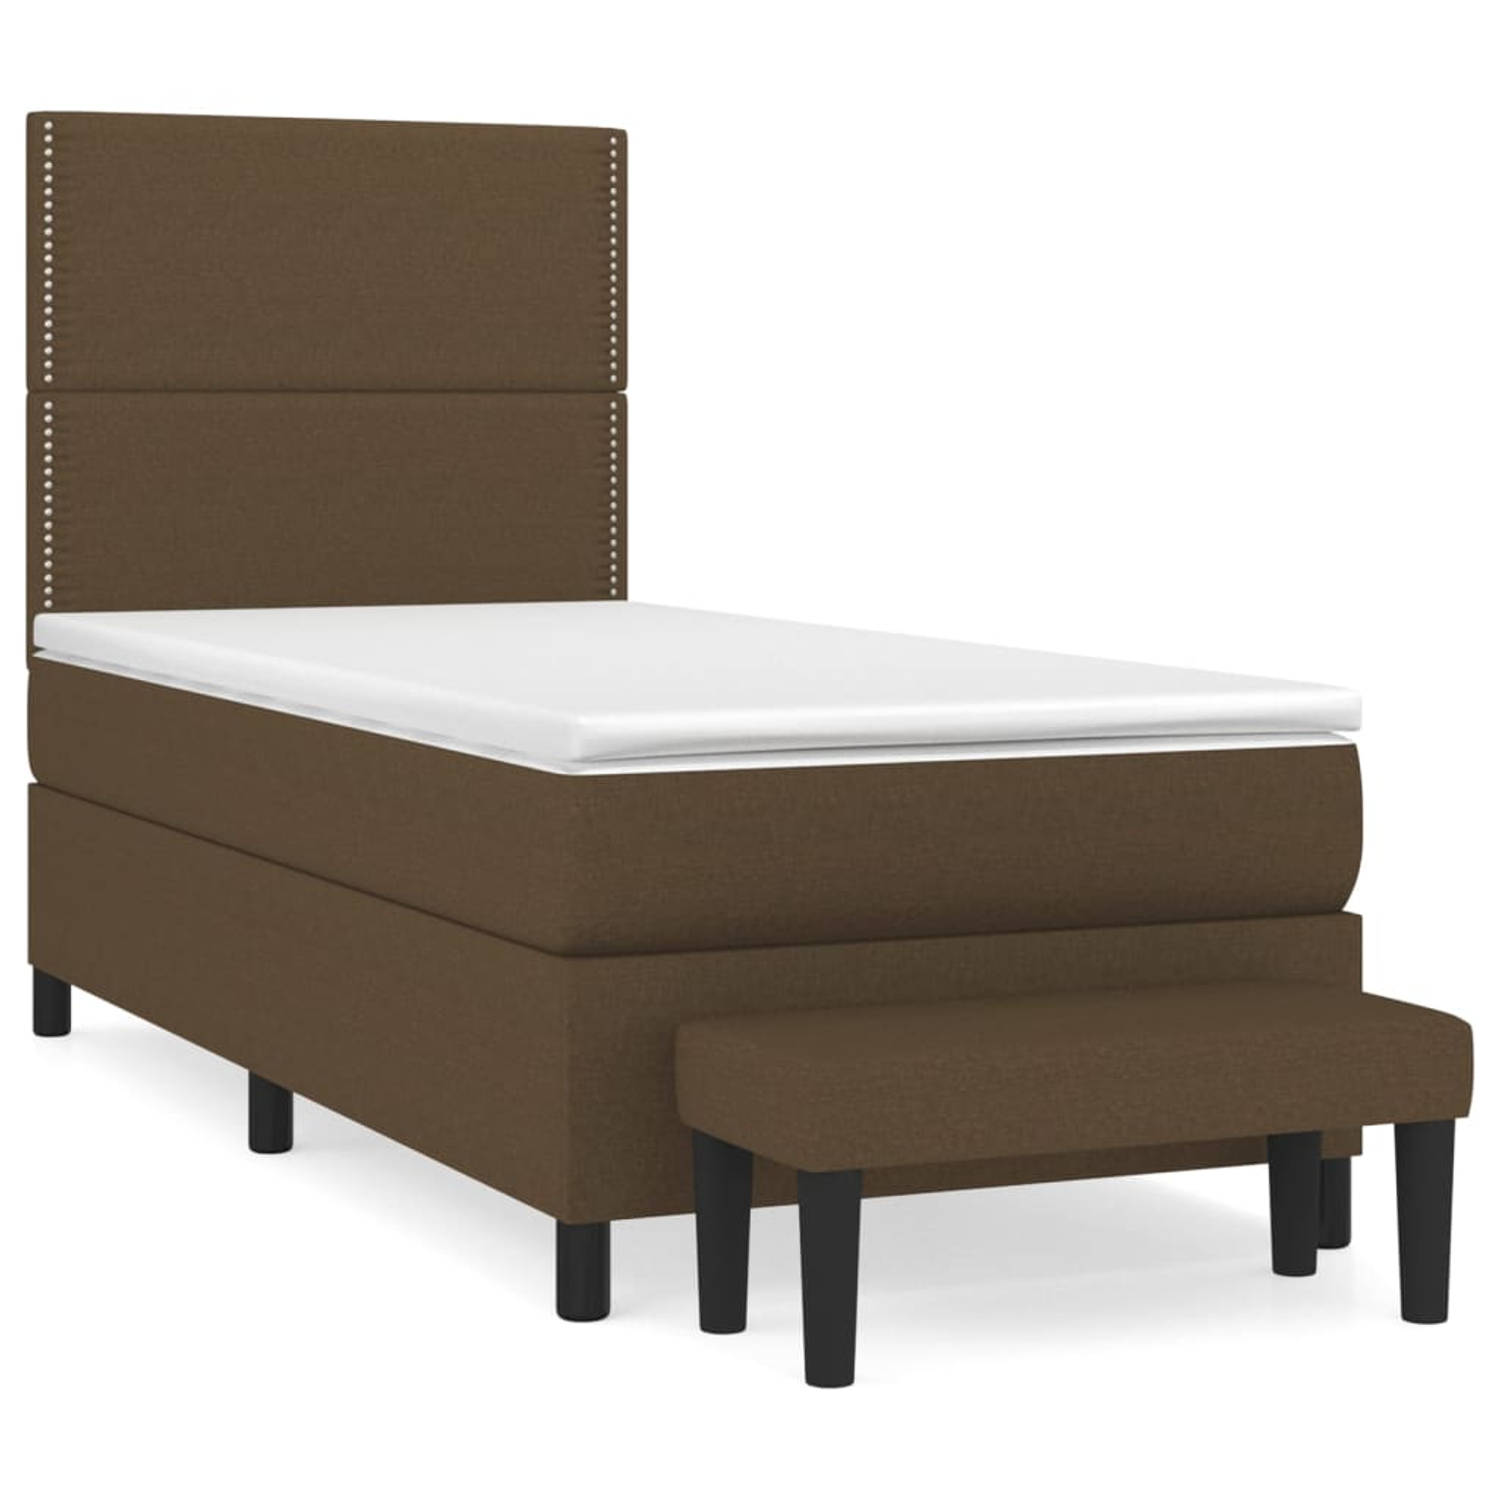 The Living Store Boxspringbed - Comfort - Bedframe 203 x 90 x 118/128 cm - Donkerbruin